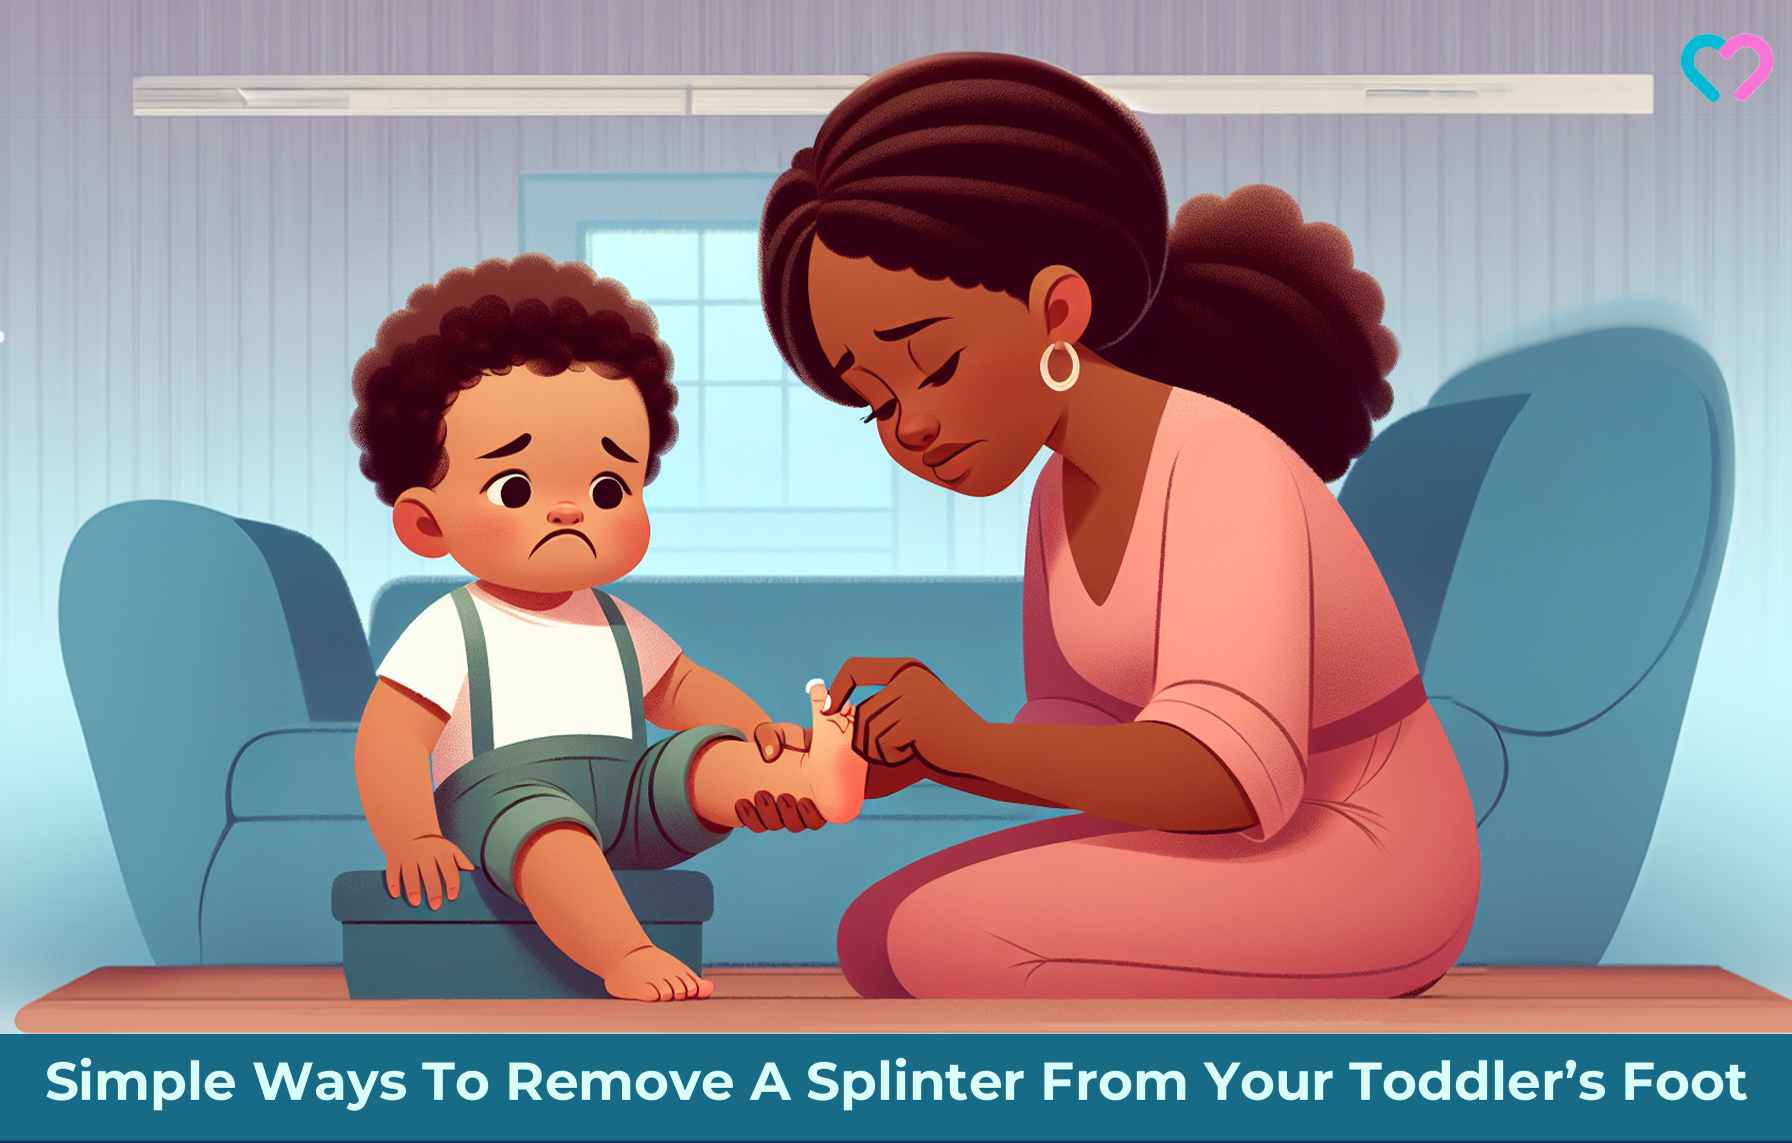 Remove A Splinter From Your Toddler’s Foot_illustration